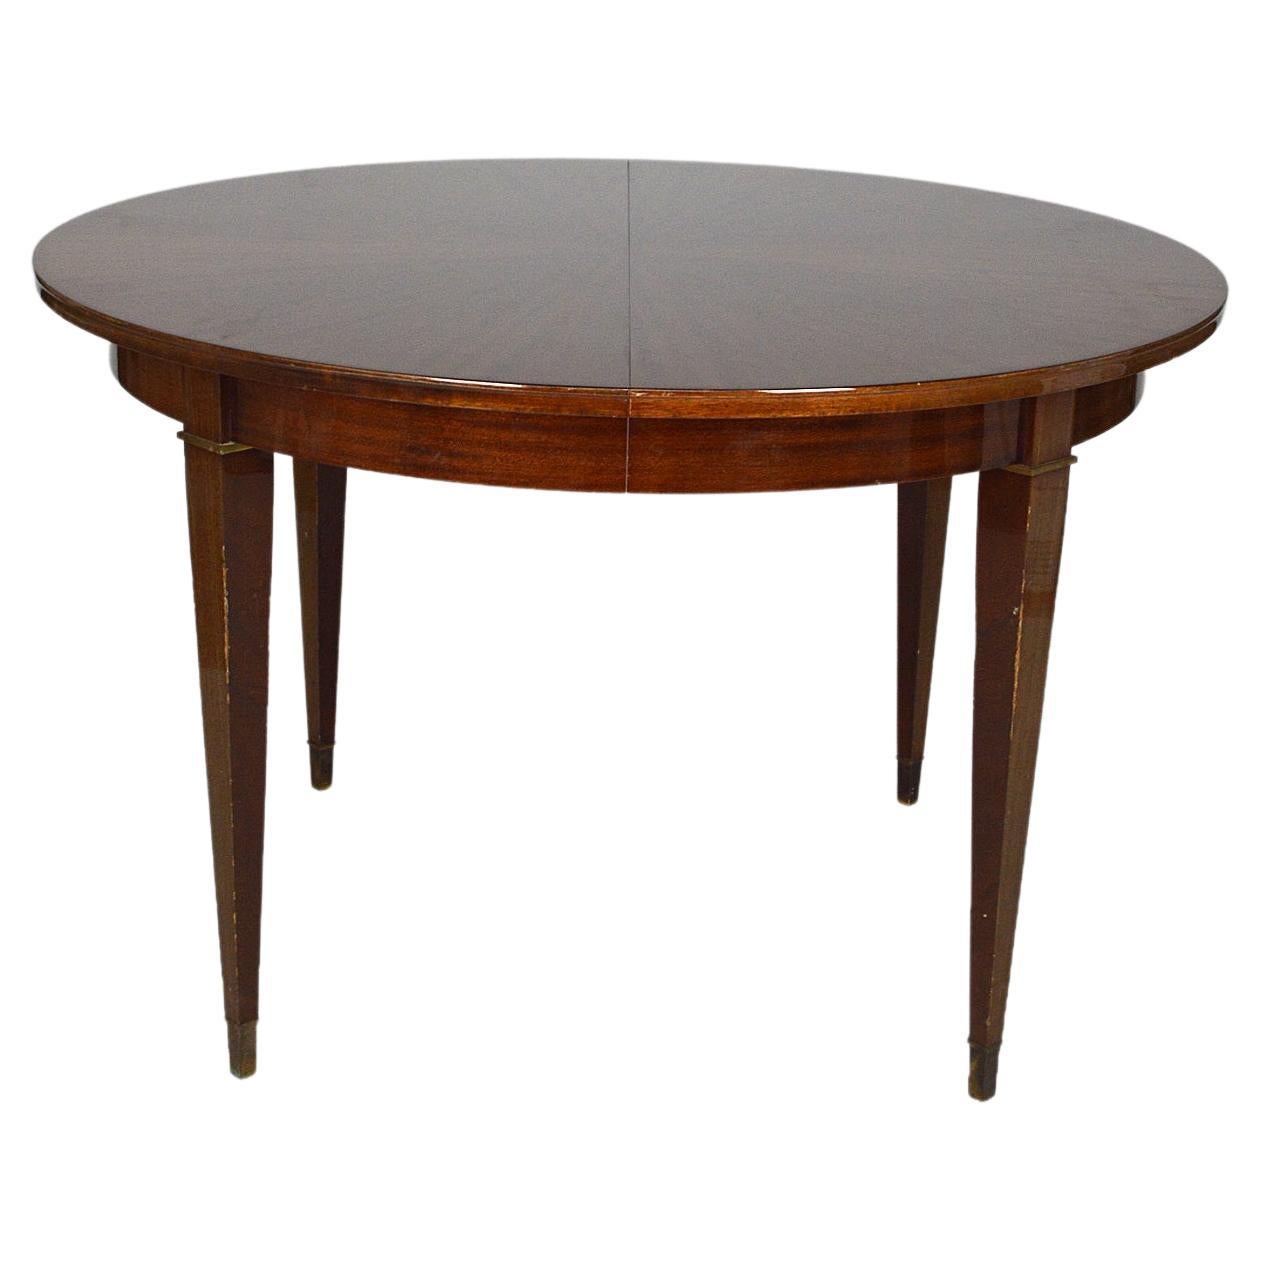 Art Deco Extendable Round Table in Mahogany, by Jacques Adnet, circa 1940